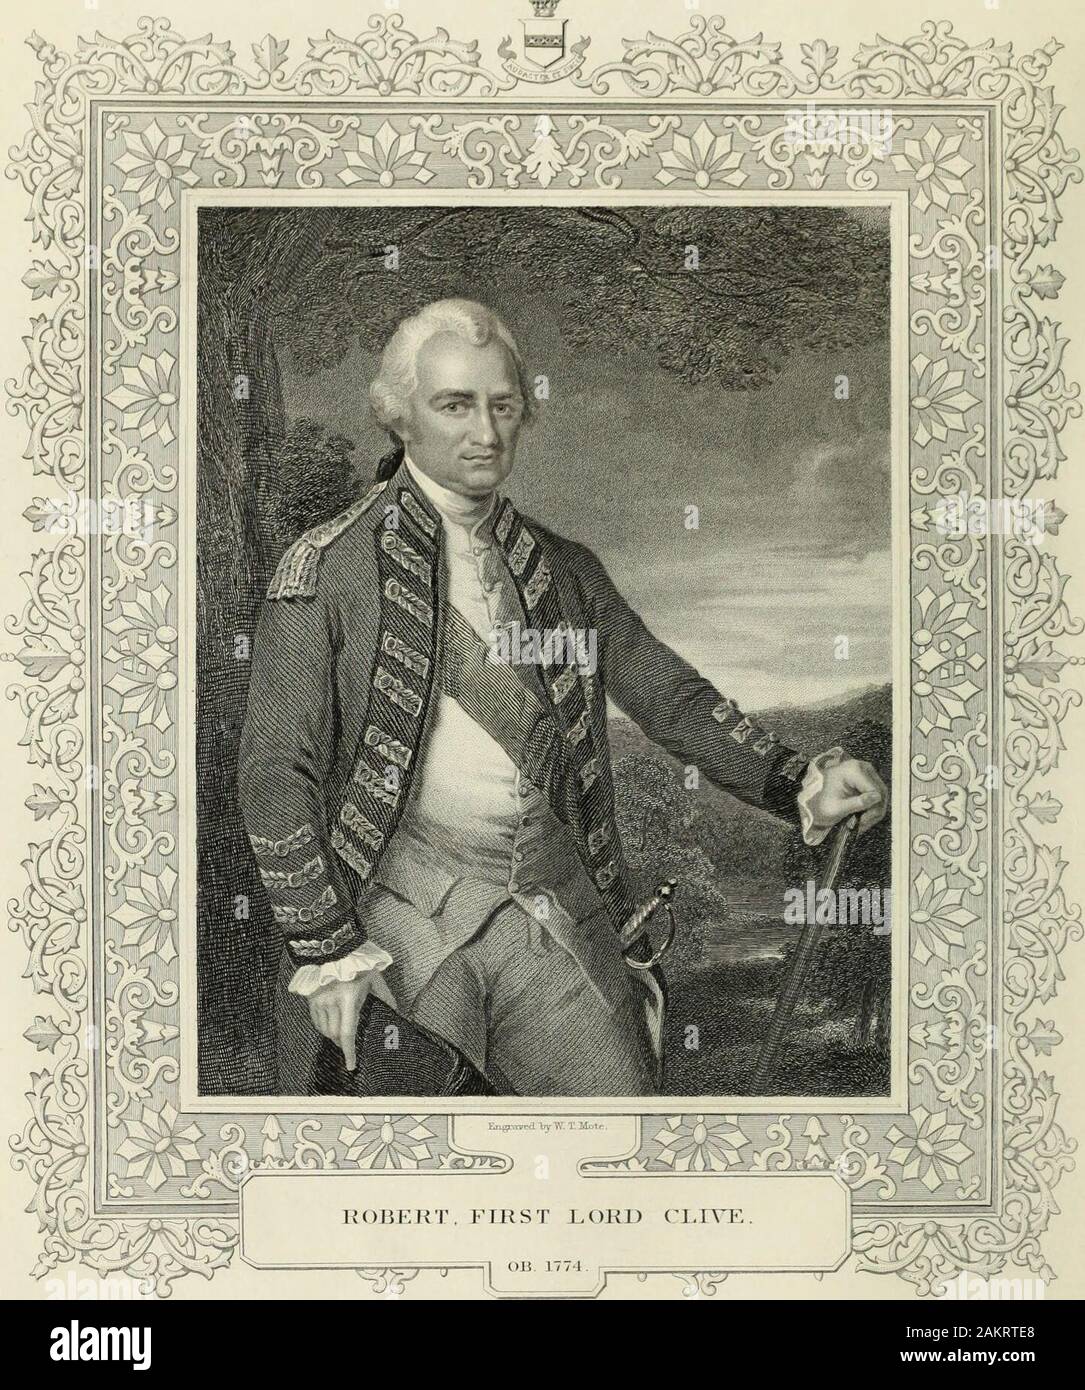 Portraits of illustrious personages of Great Britain : Engraved from authentic pictures in the galleries of the nobility, and the public collections of the countryWith biographical and historical memoirs of their lives and actions . y, 1774, when he died at Holland House, in thesixty-ninth year of his age. The prominent place which he so long filled, and the spirit of the times in which he lived, exposedhim to the attacks of those who differed from him in politics, and by whom he has been painted as aprofligate and unprincipled minister. The testimony of Lord Waldegrave, which we have quoted a Stock Photo